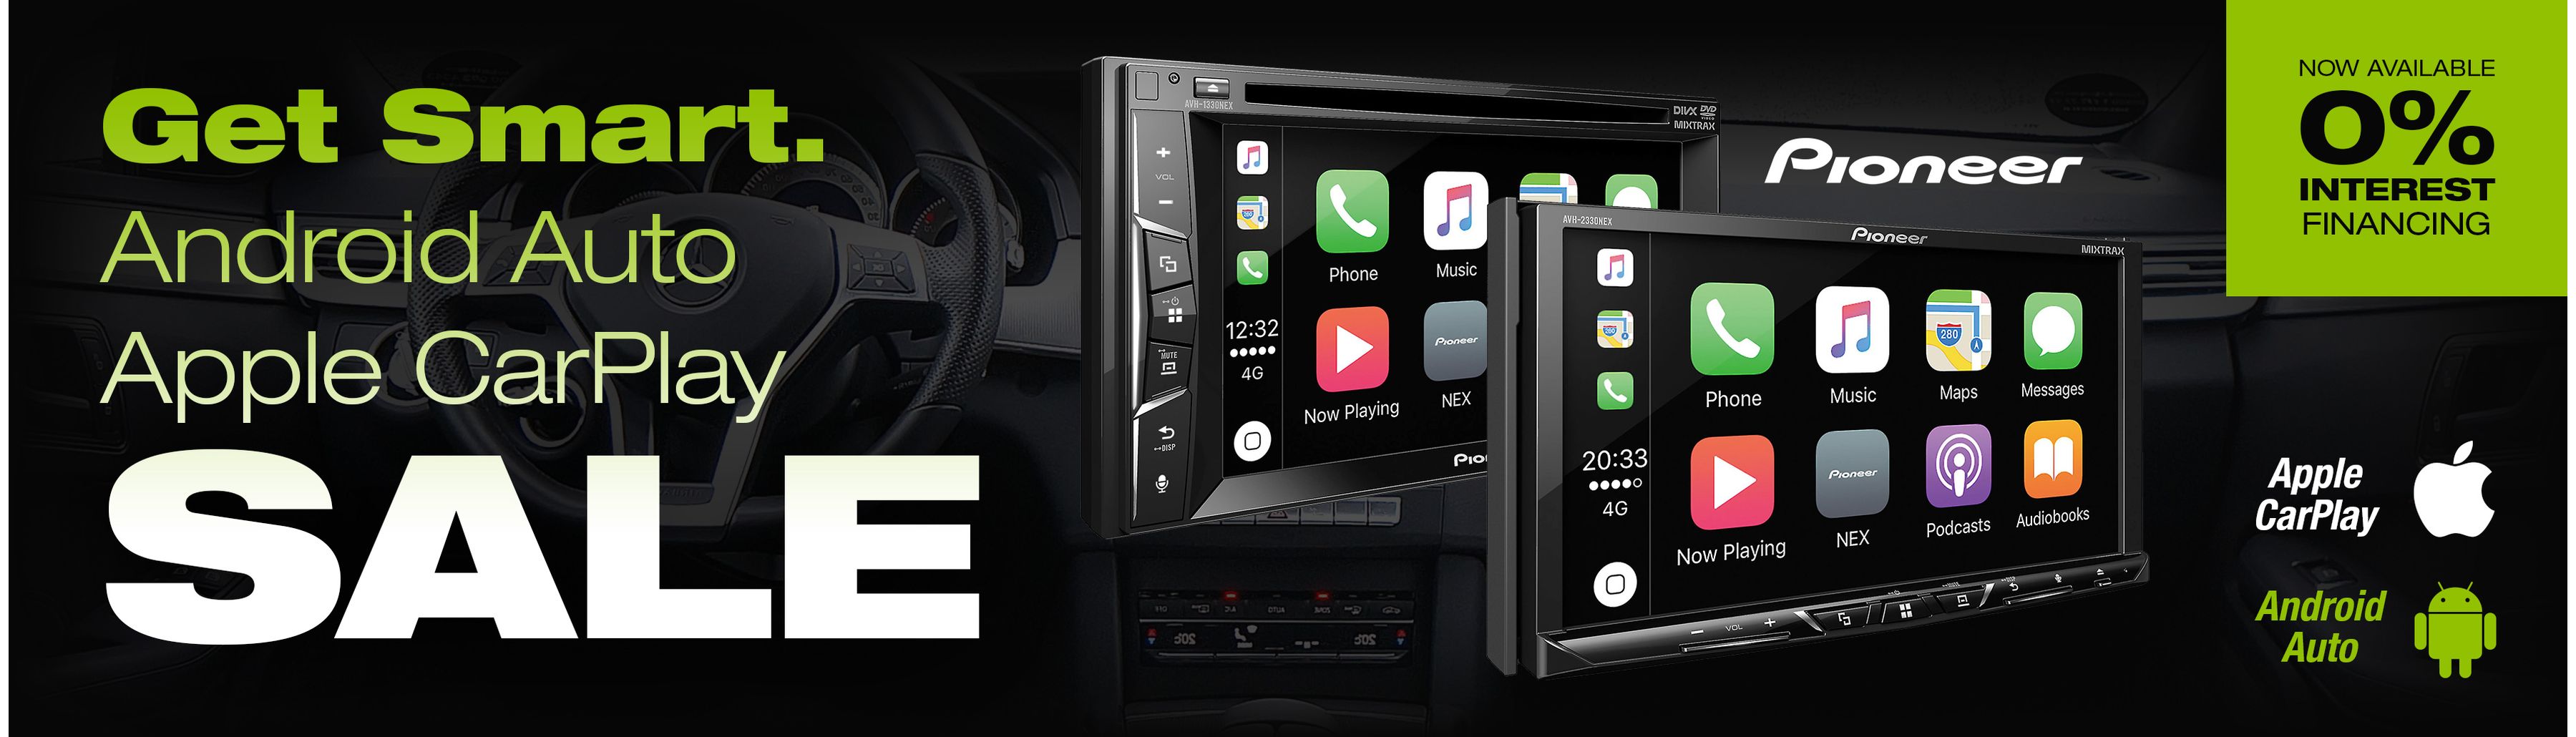 android-carplay_pioneer-banner.17180796